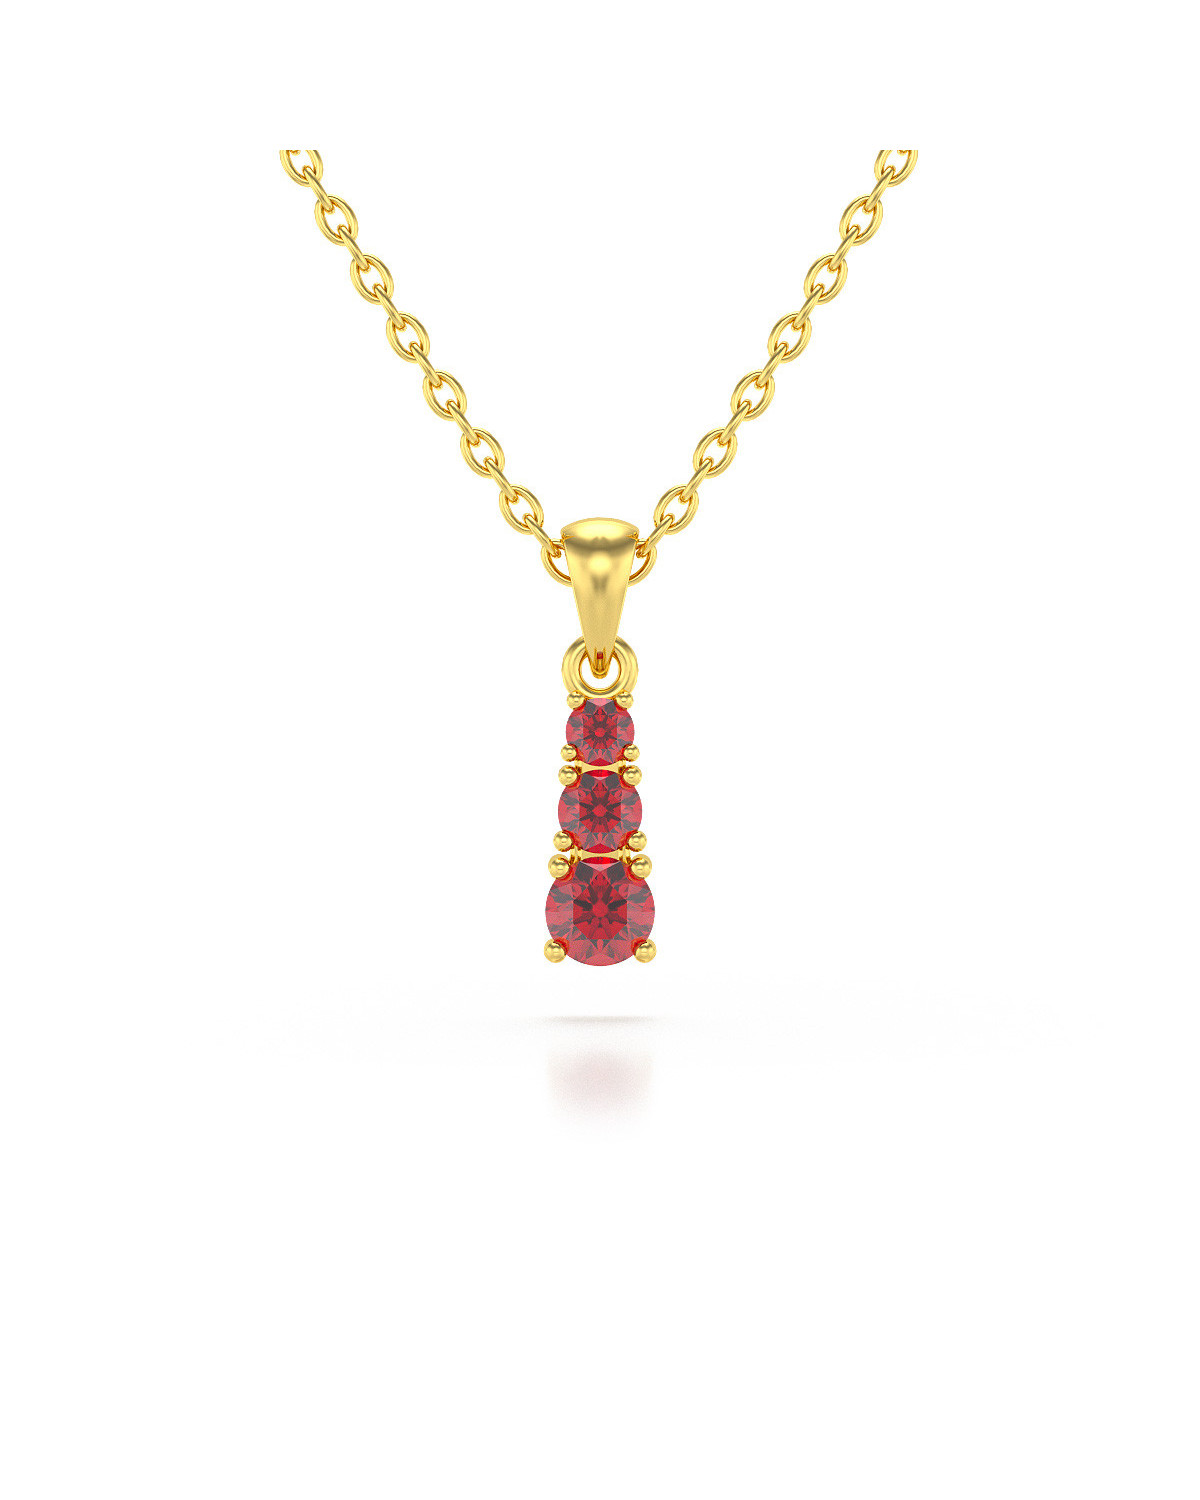 Collier Pendentif Or Jaune Rubis Chaine Or incluse 0.45grs